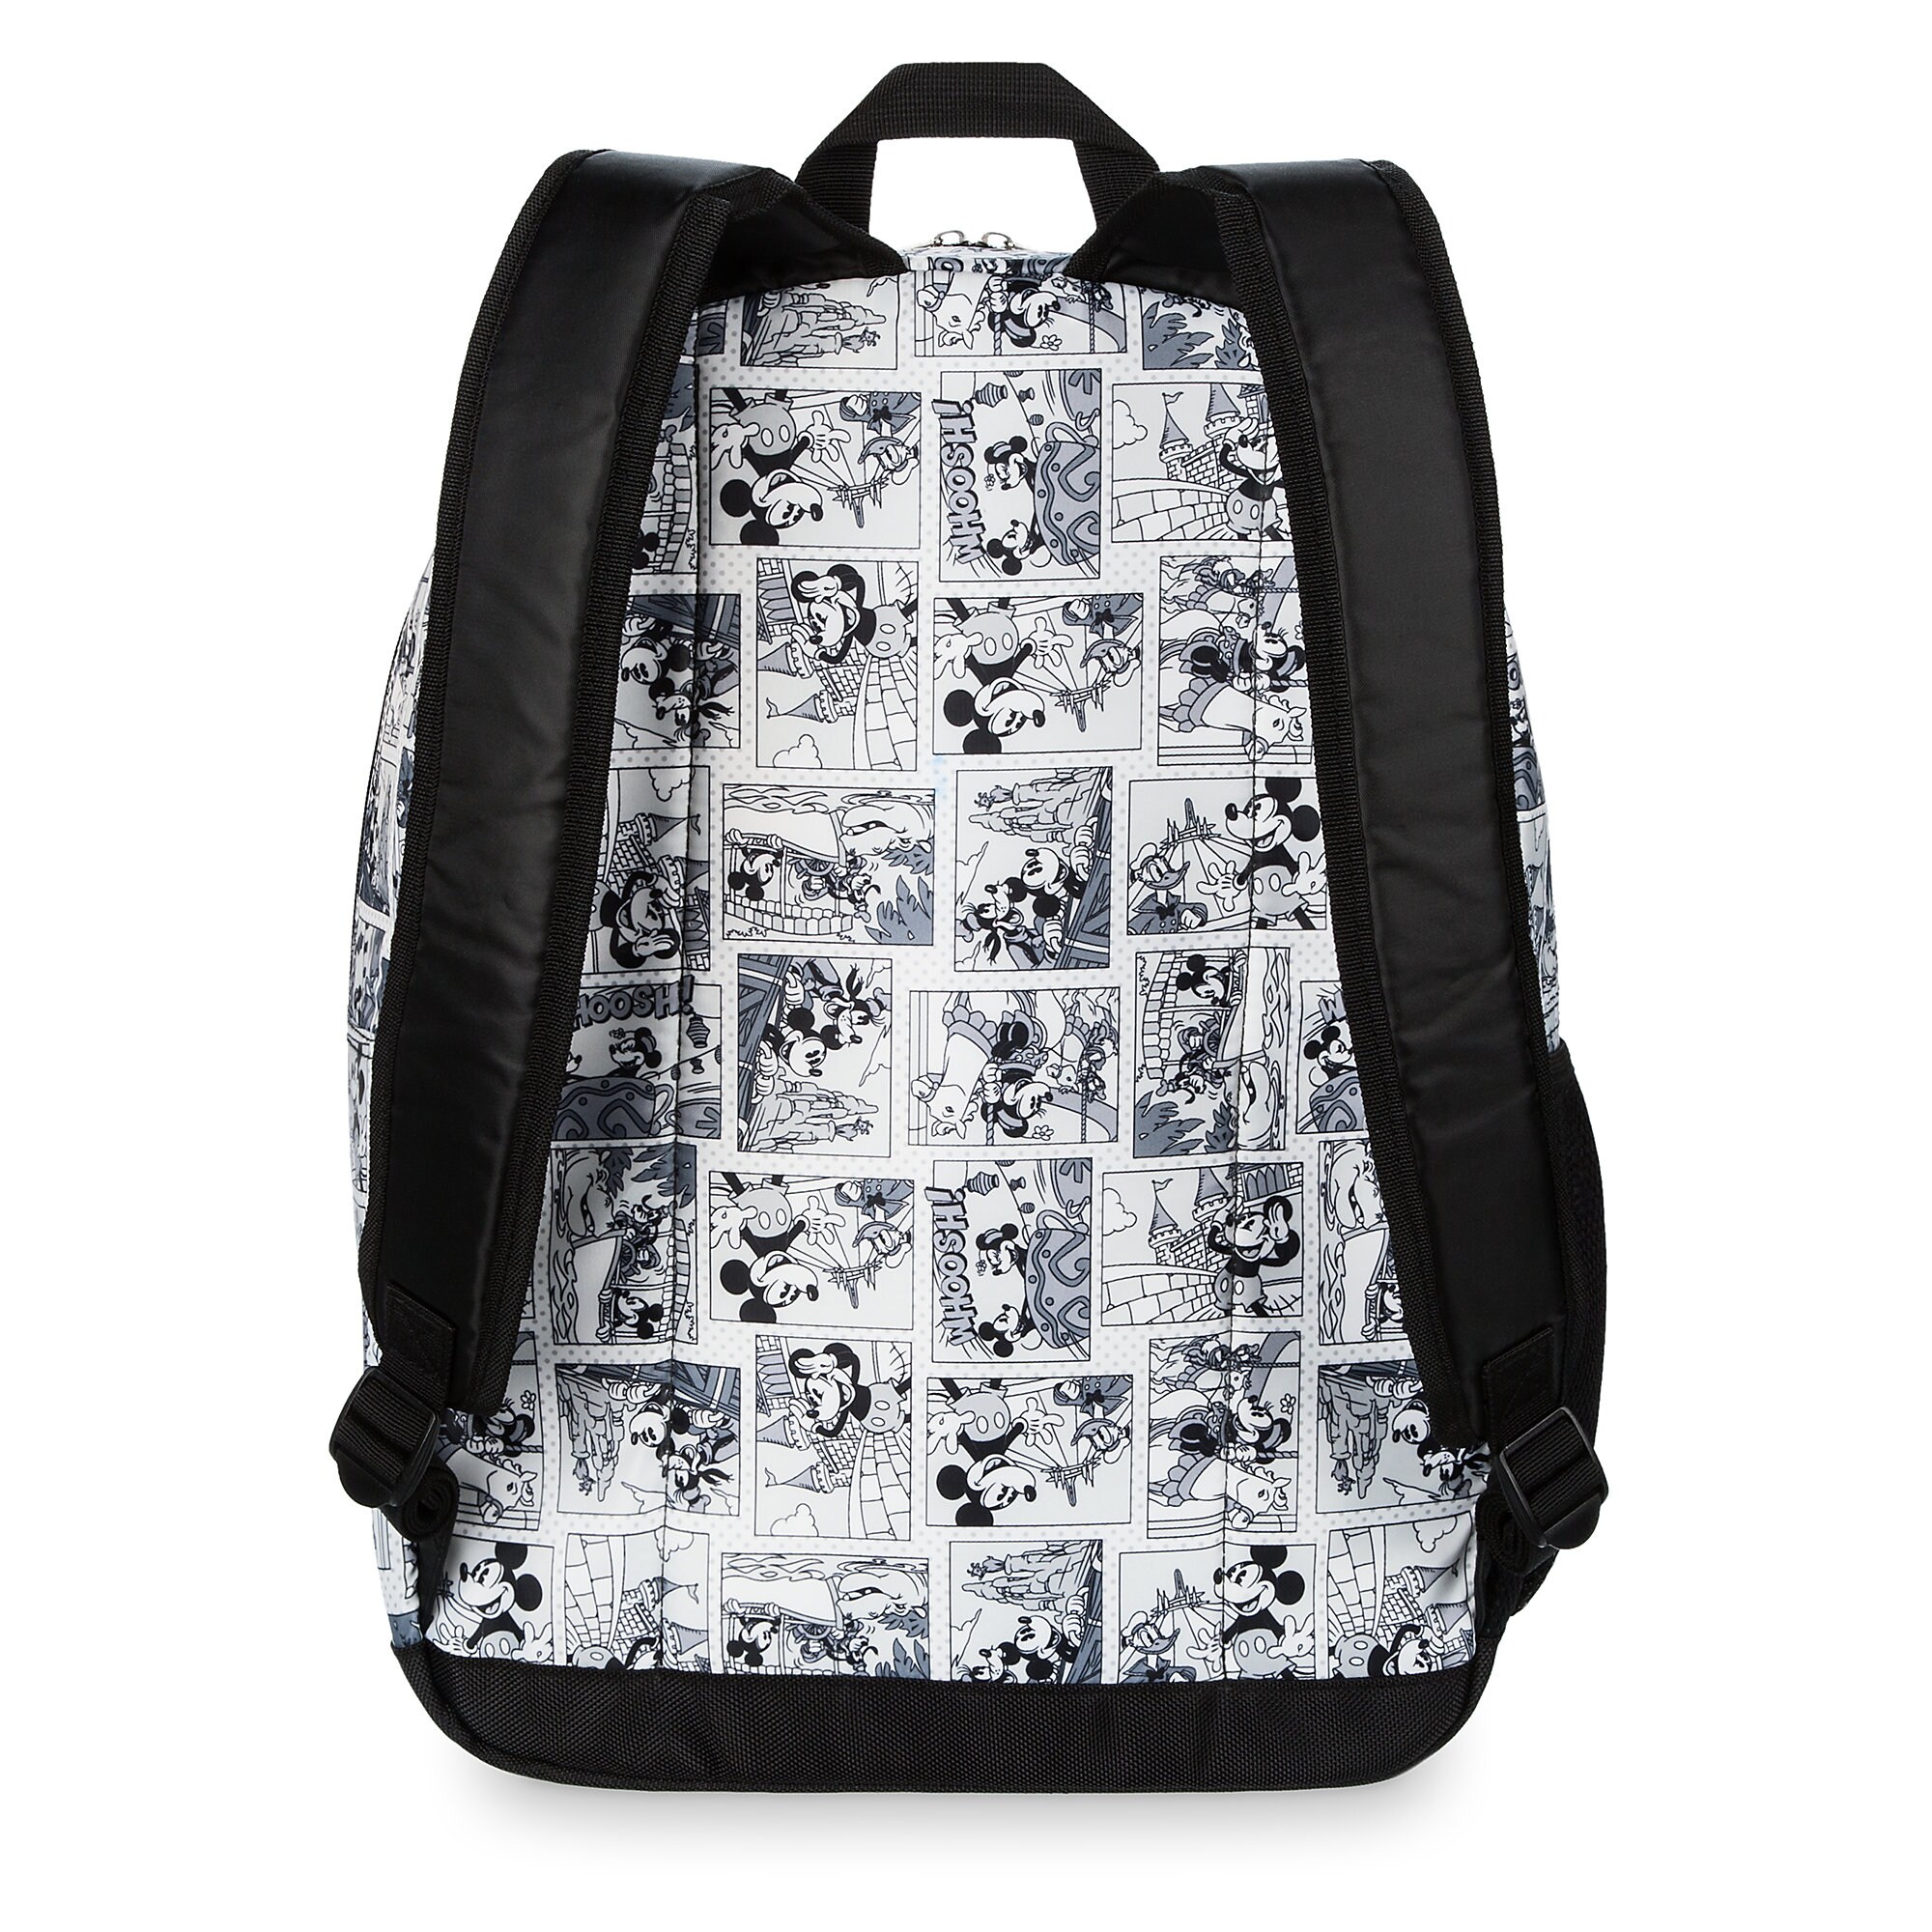 Mickey Mouse Comic Backpack